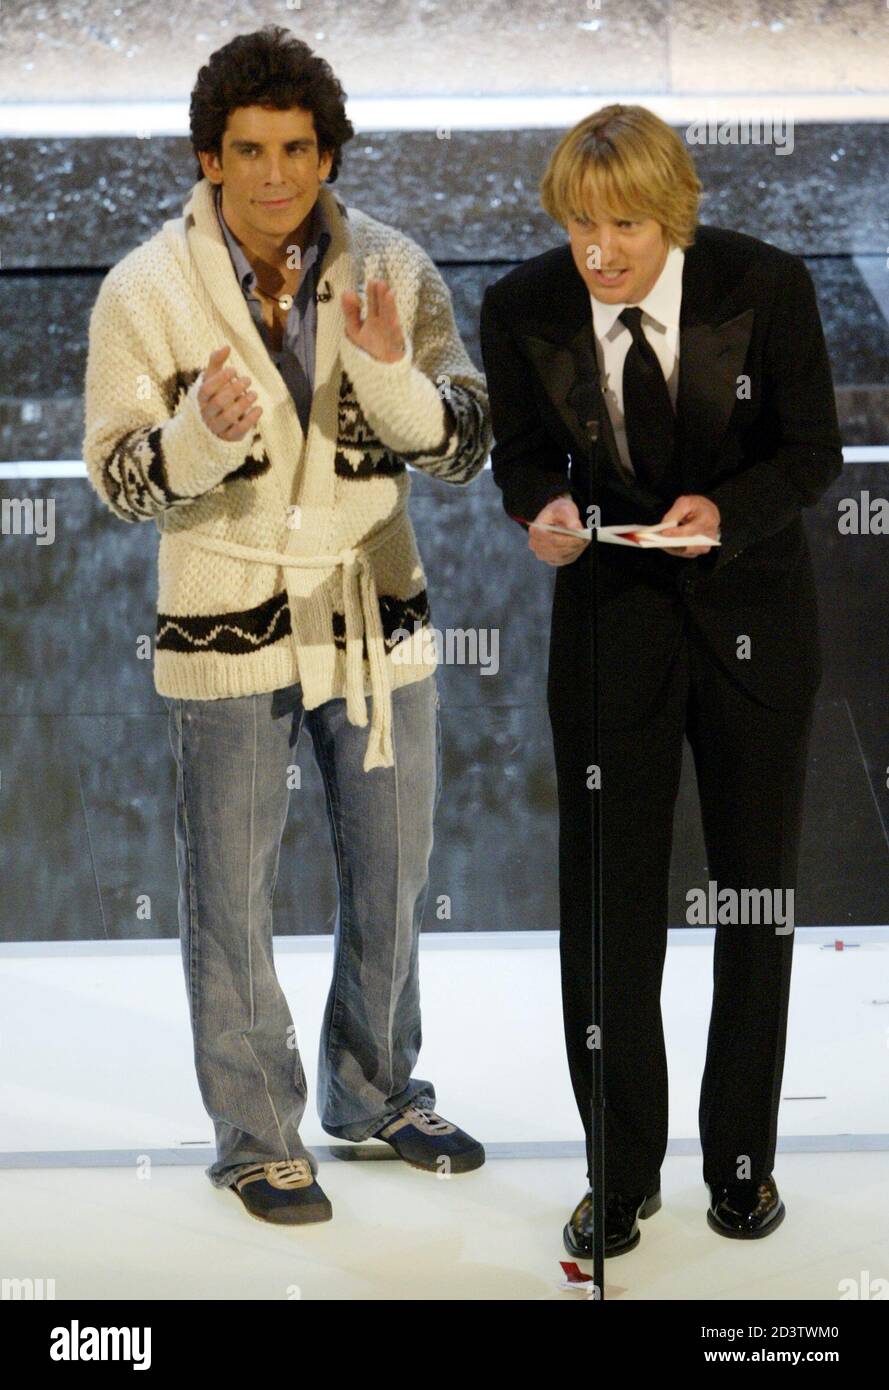 Actors Ben Stiller (L) and Owen Wilson present the Oscar for best live  action short film. The two star in the upcoming relaease "Starsky and  Hutch". The fim "Two Soldiers" won the